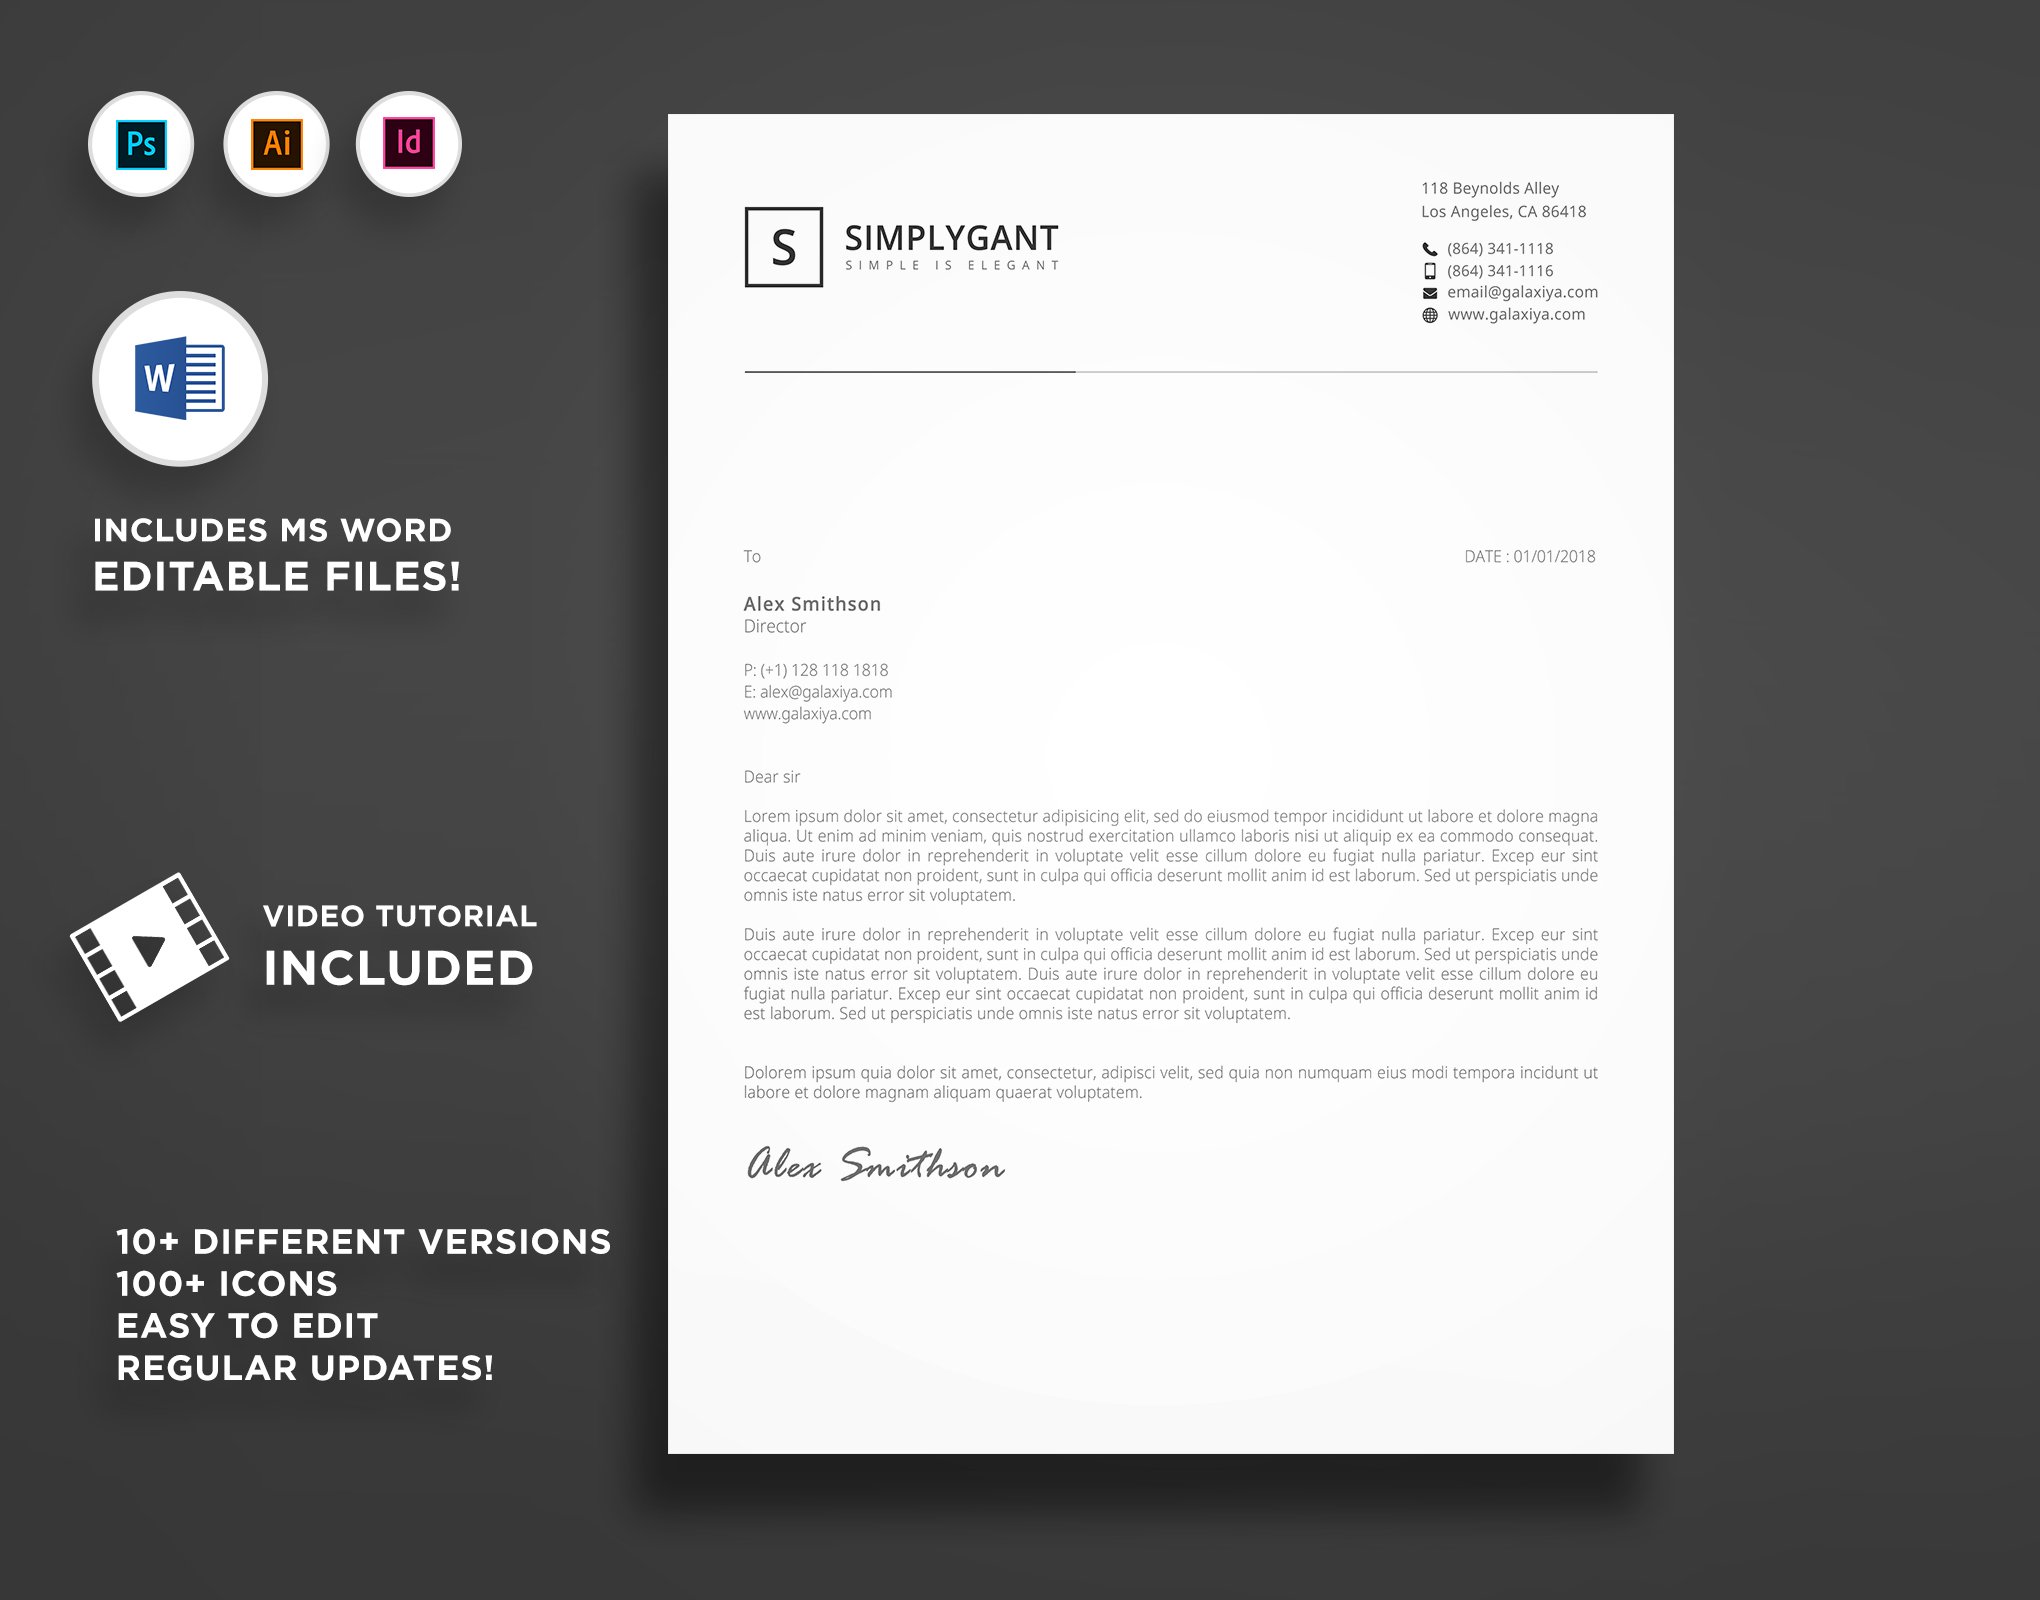 Minimal Professional Letterheads cover image.